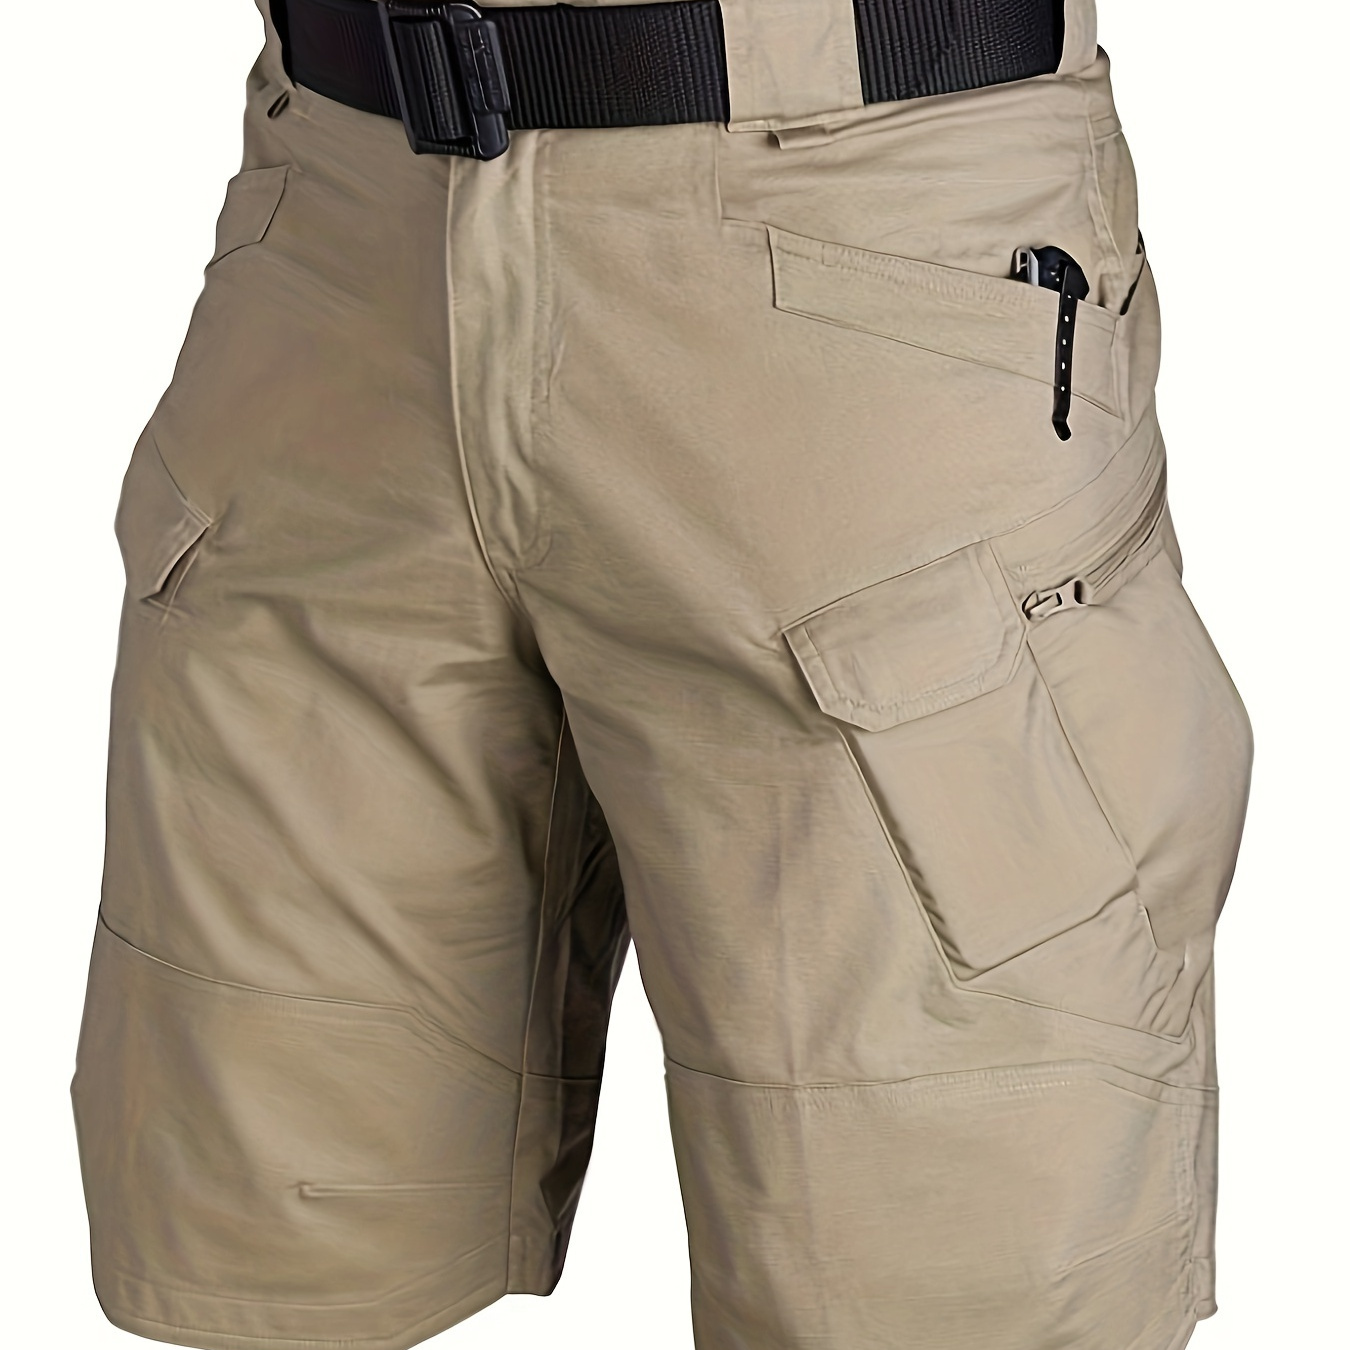 

Men's Multi-pocket Tactical Shorts Multi-purpose Cargo Shorts Outdoor Waterproof Hiking Track Shorts ( Larger Size Recommended)